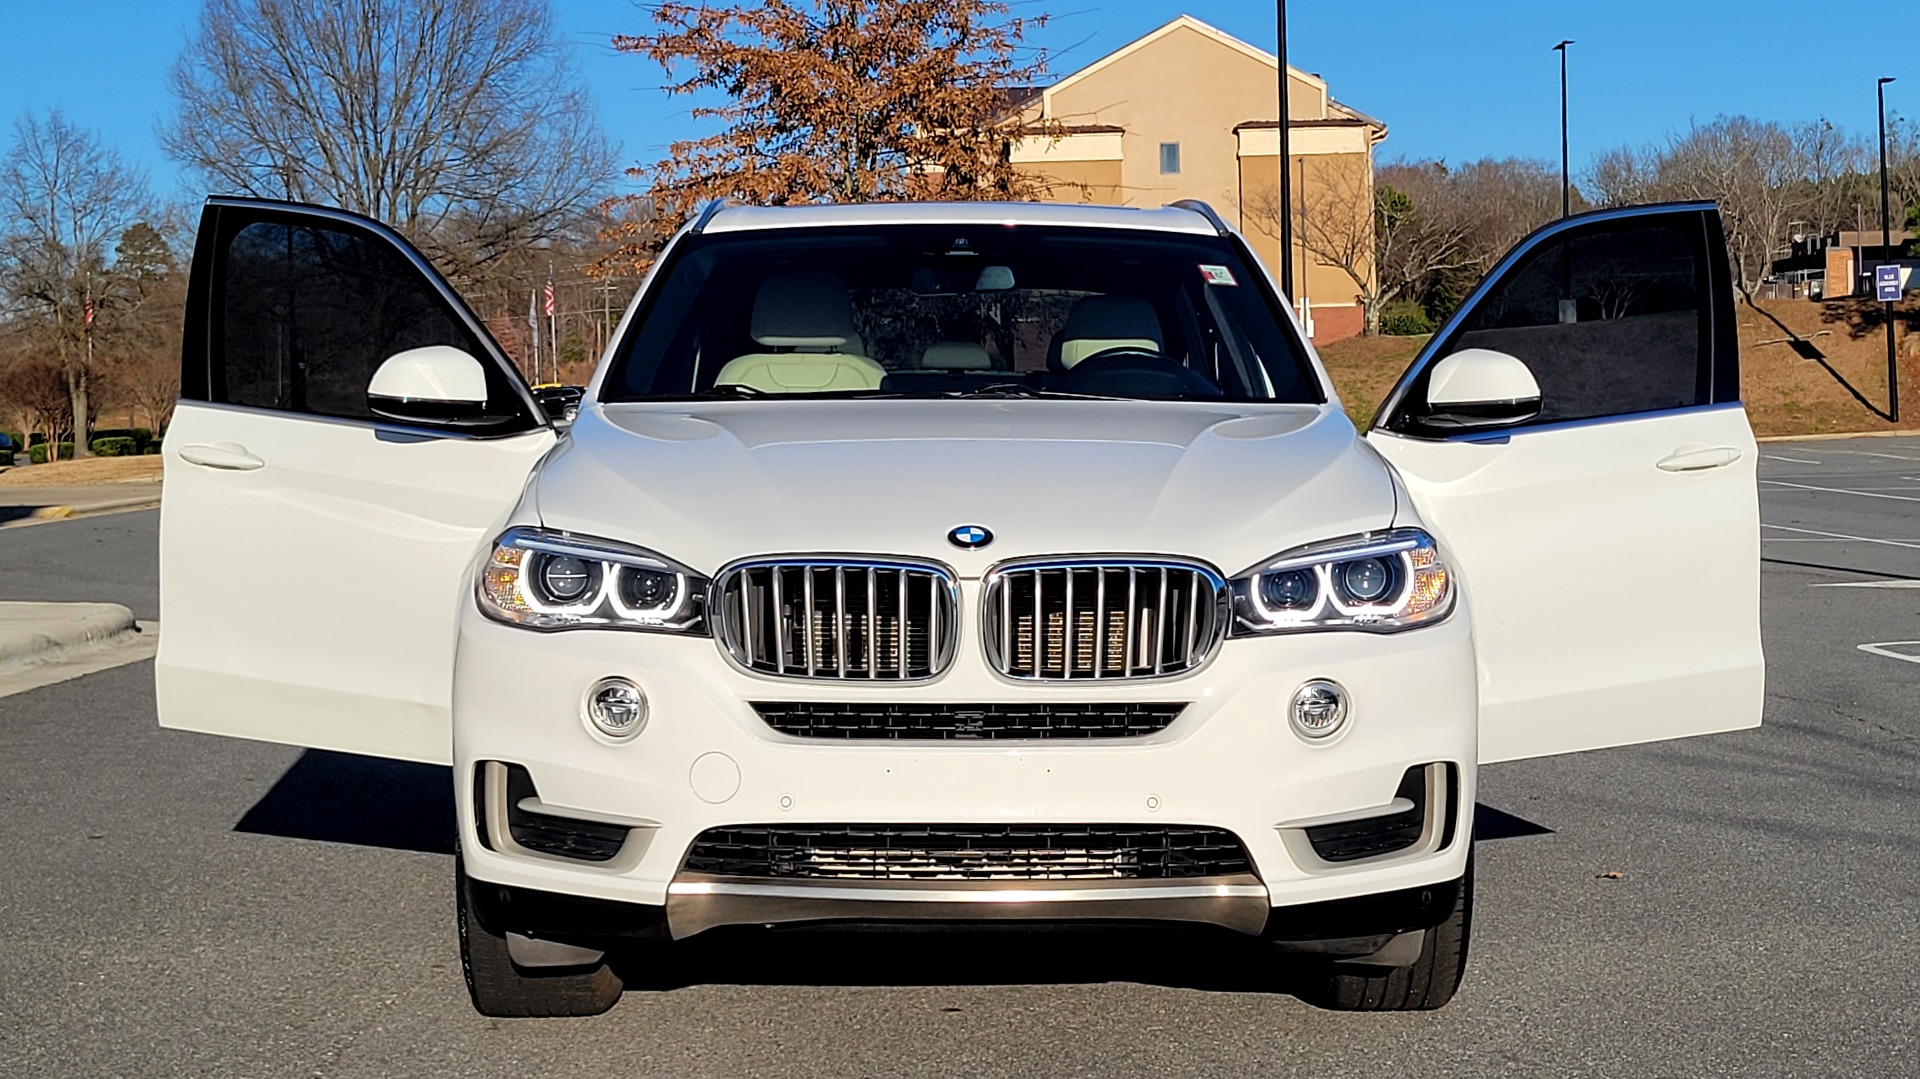 Used 2018 BMW X5 XDRIVE35I PREMIUM / DRVR ASST / HUD / WIRELESS CHARGING / HEATED SEATS for sale $41,995 at Formula Imports in Charlotte NC 28227 22